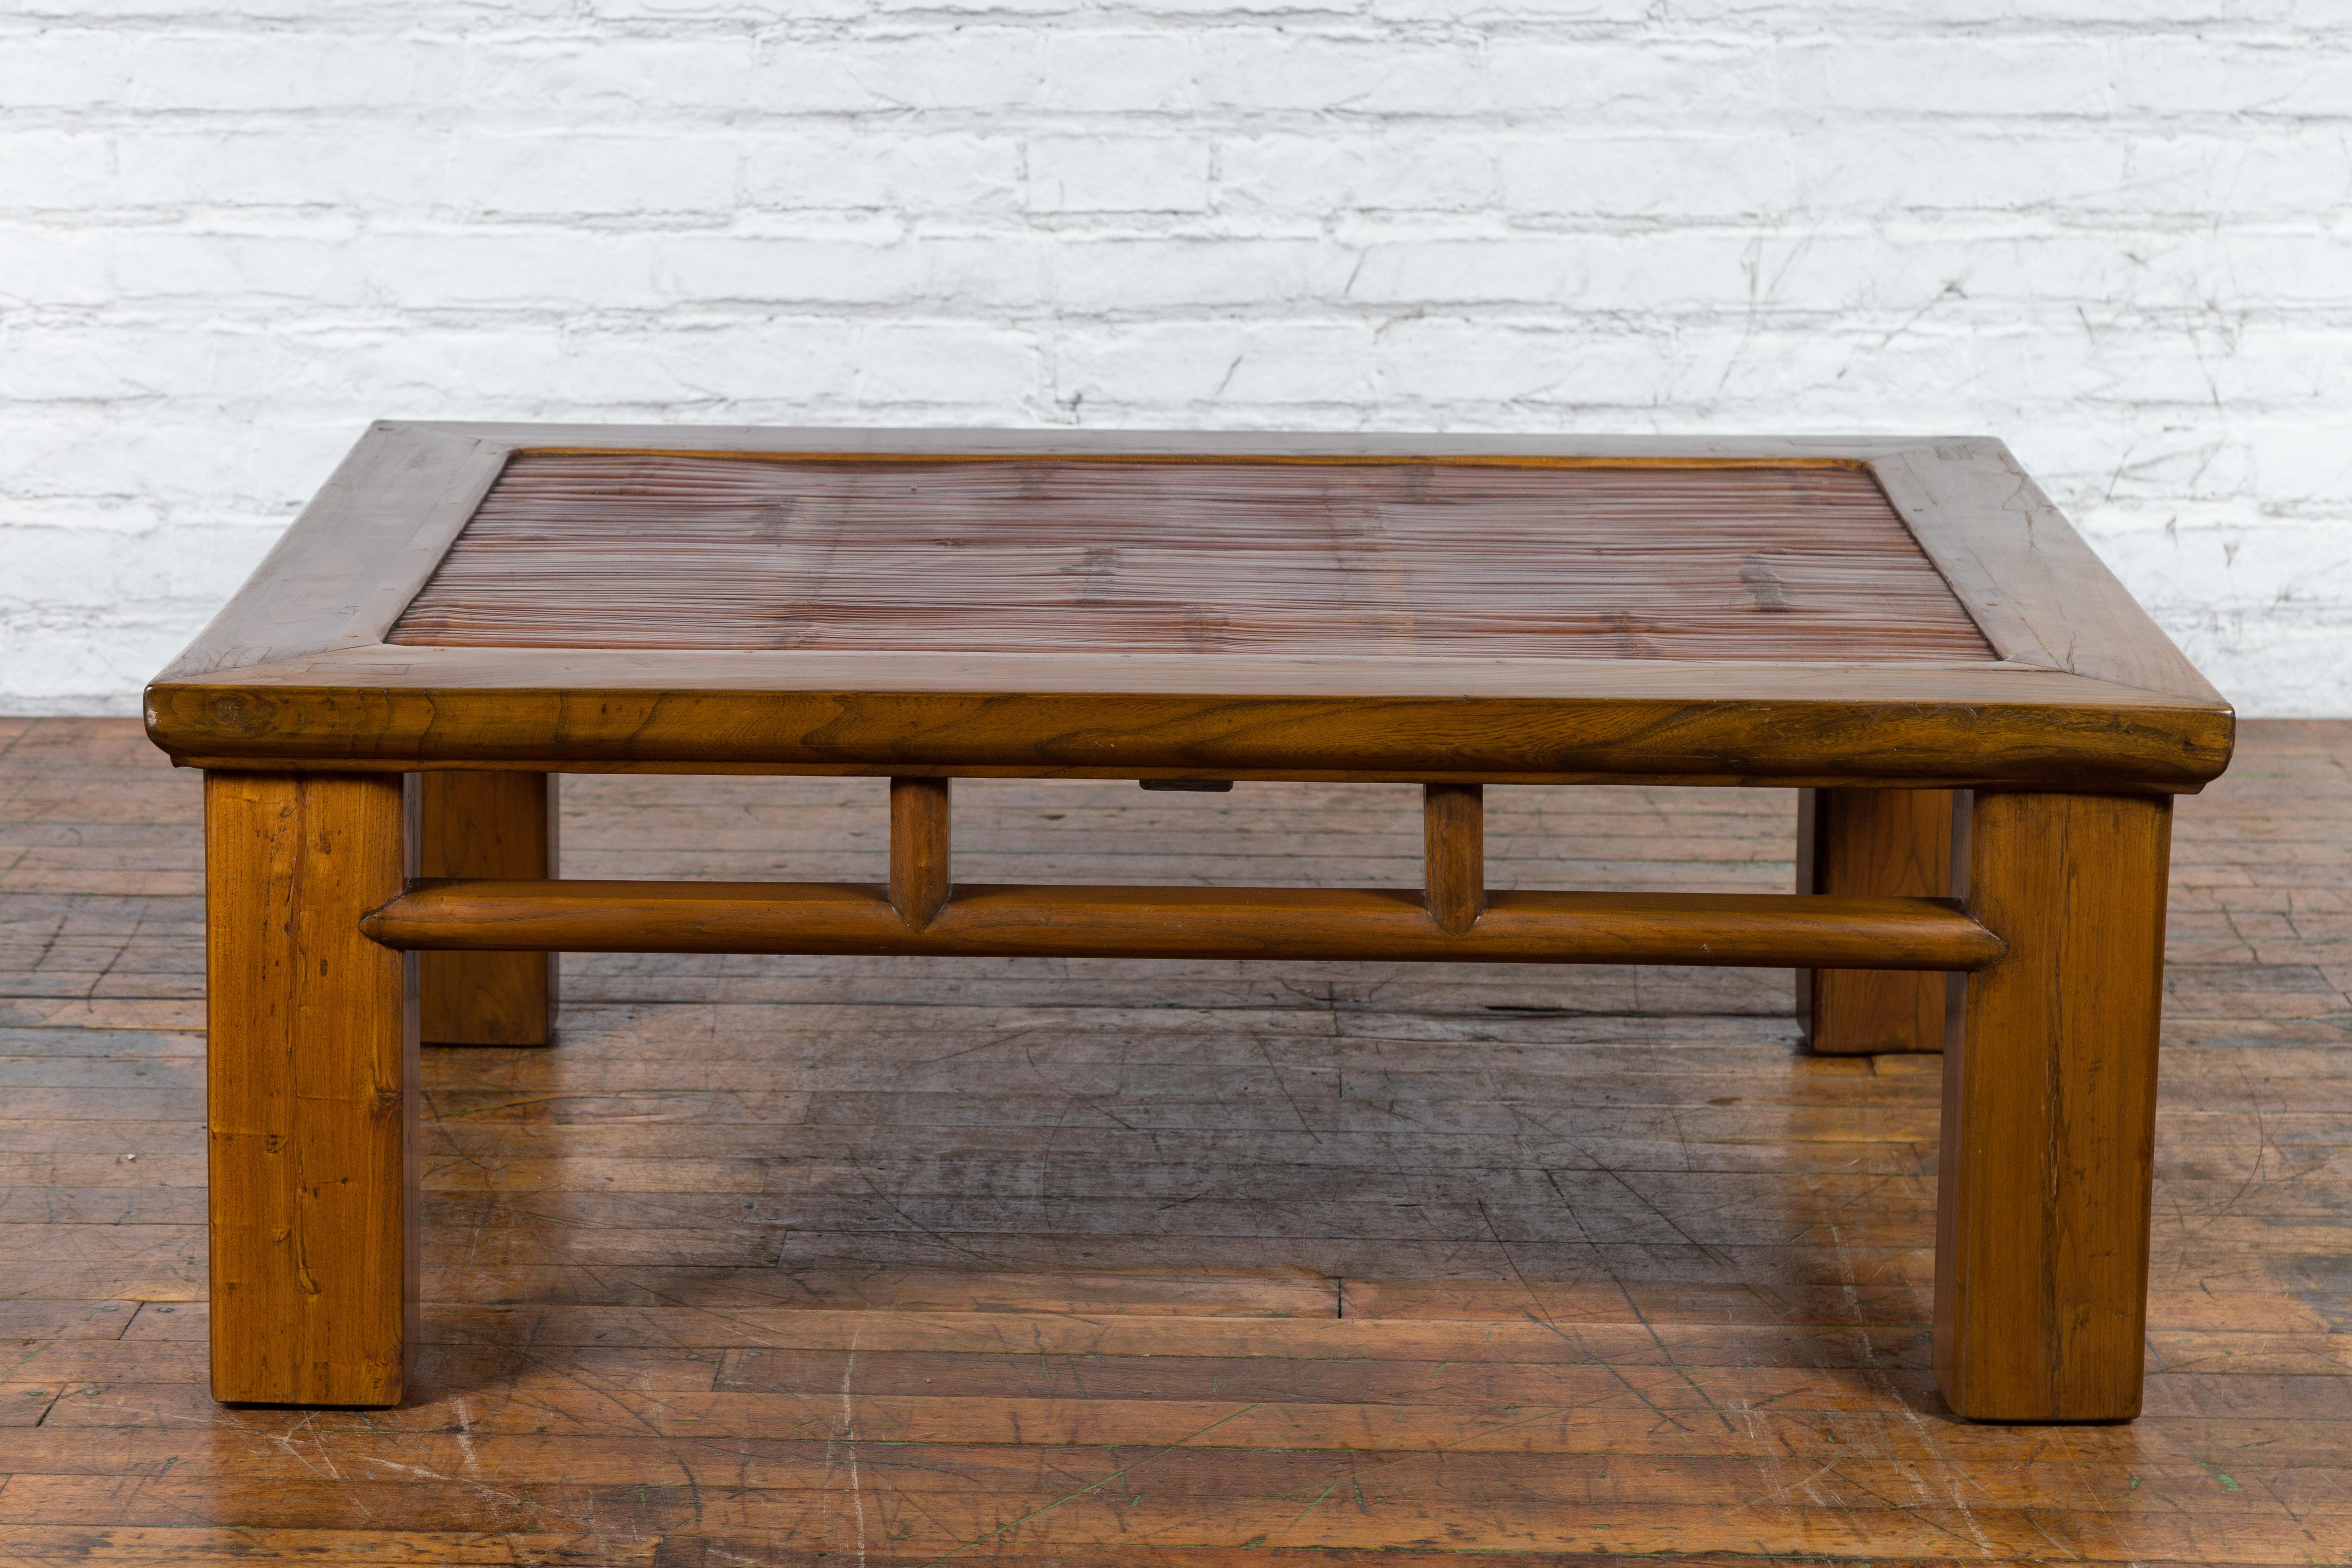 A Chinese Late Qing Dynasty period wooden low table from the early 20th century with bamboo top and straight legs, perfect to be used as a coffee table. Created in China during the Late Qing Dynasty in the early years of the 20th century, this low